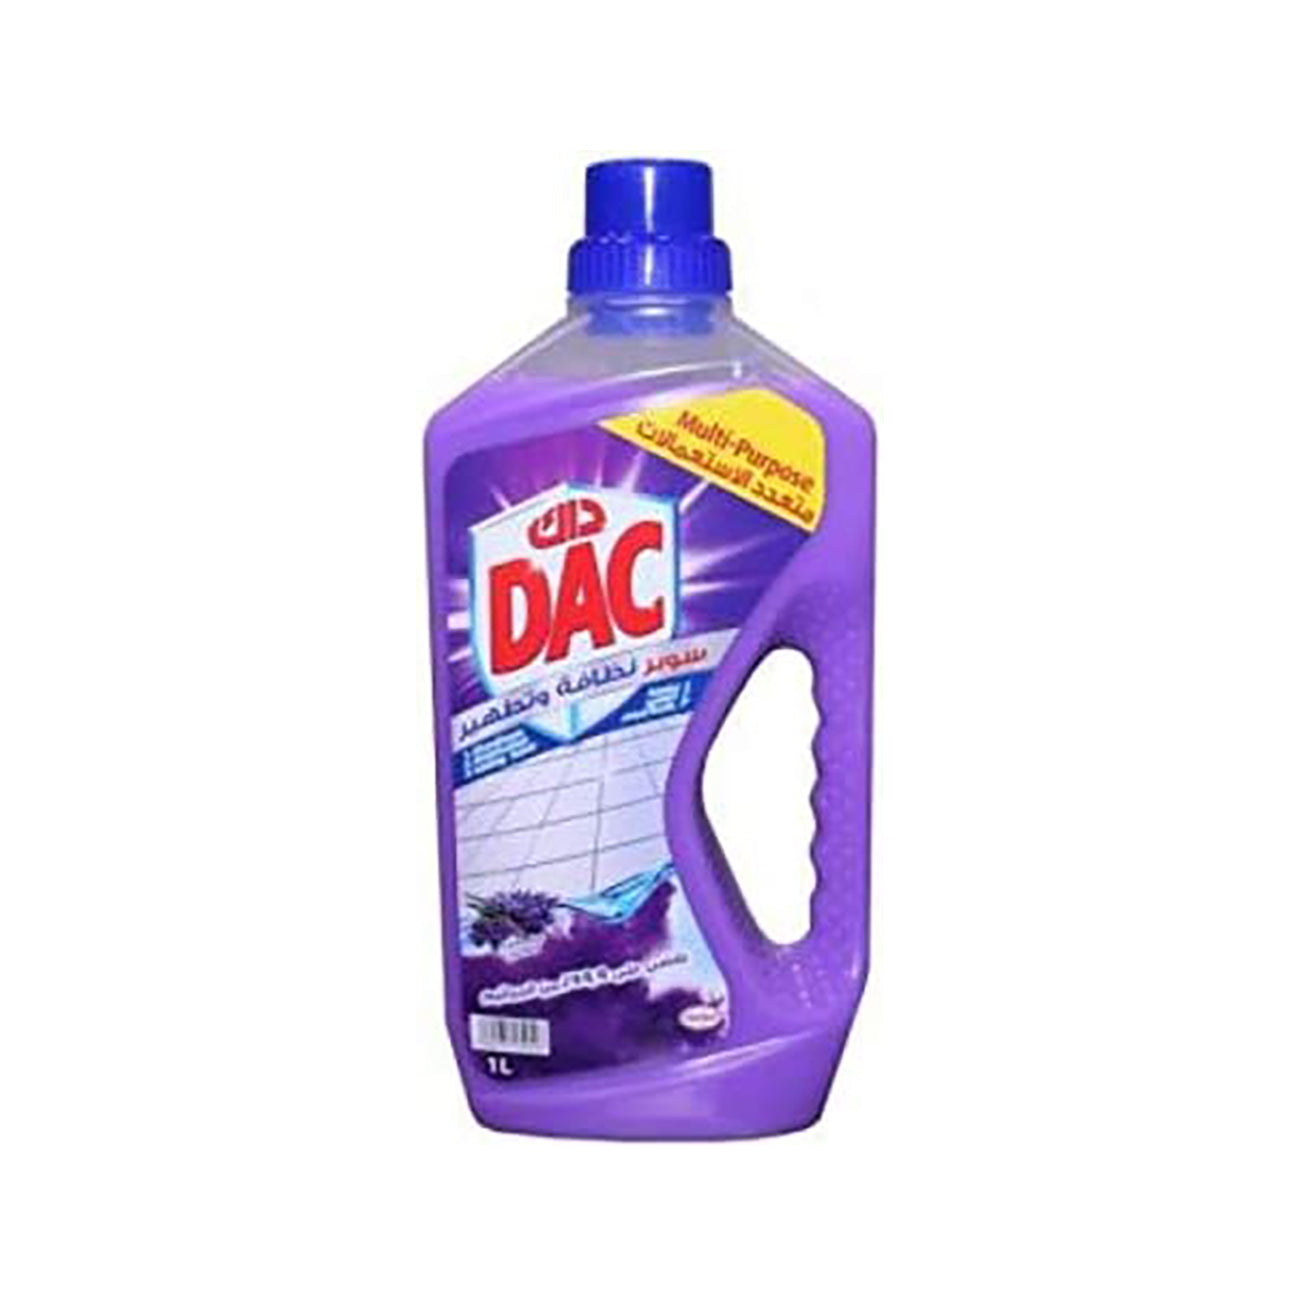 Dac Gold Multi Purpose Cleaner And Disinfectant Lavender De Provence 1Litre